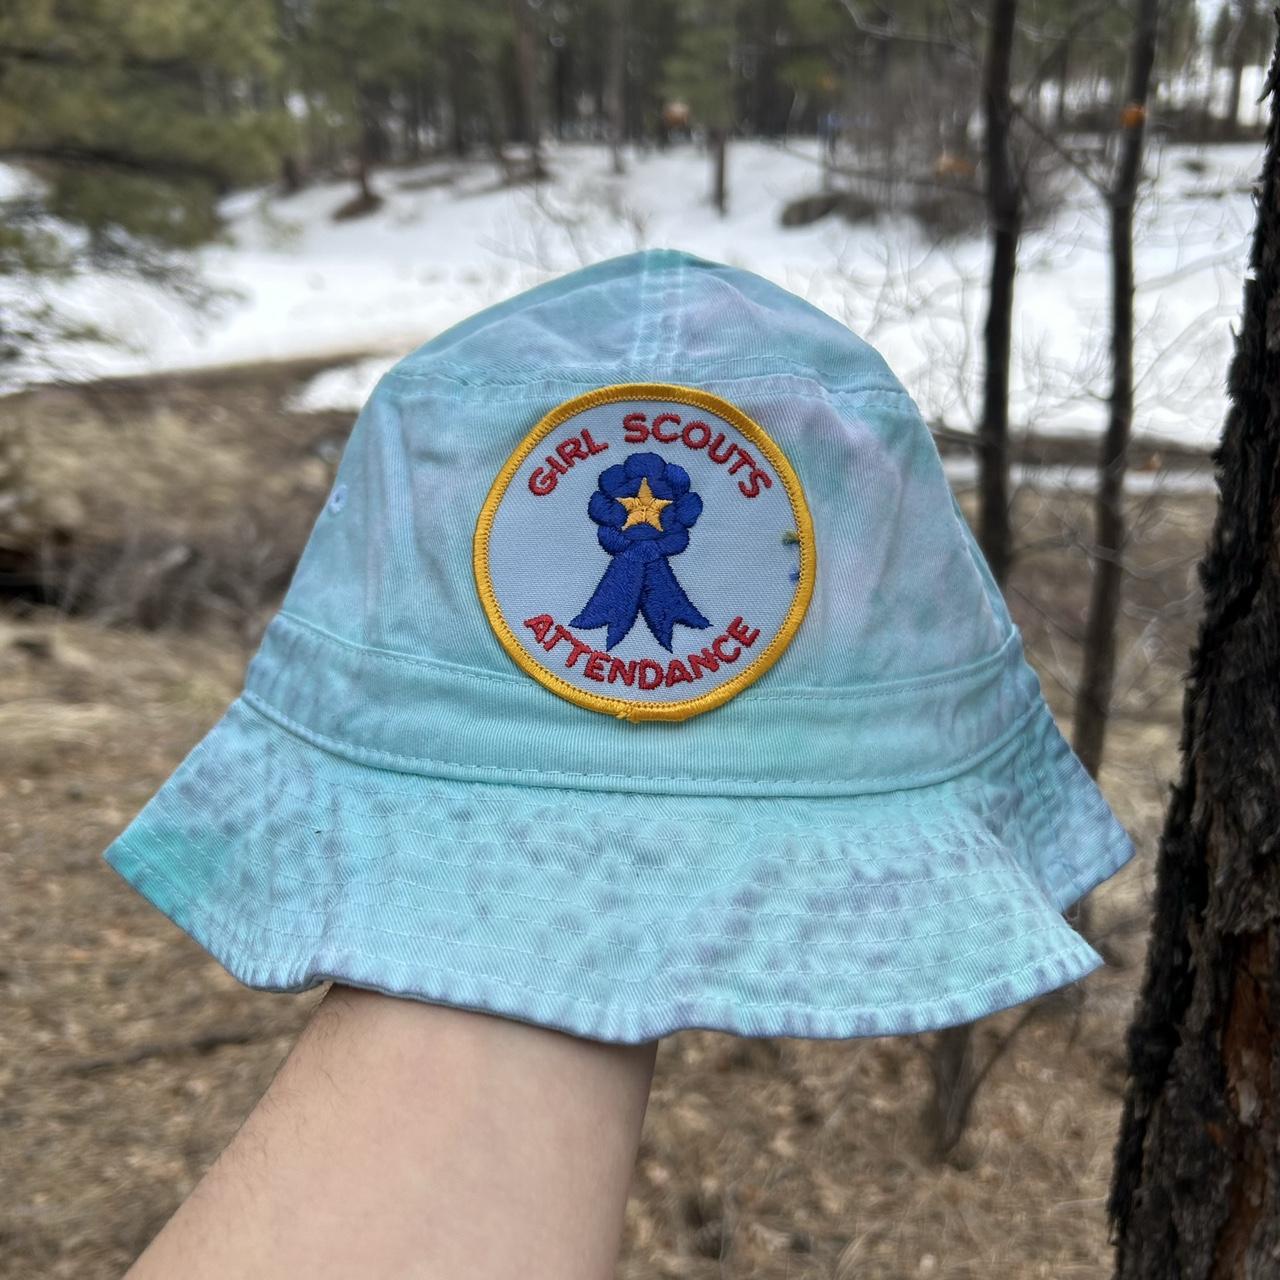 Girl Scouts Attendance Bucket Hat, this item was...